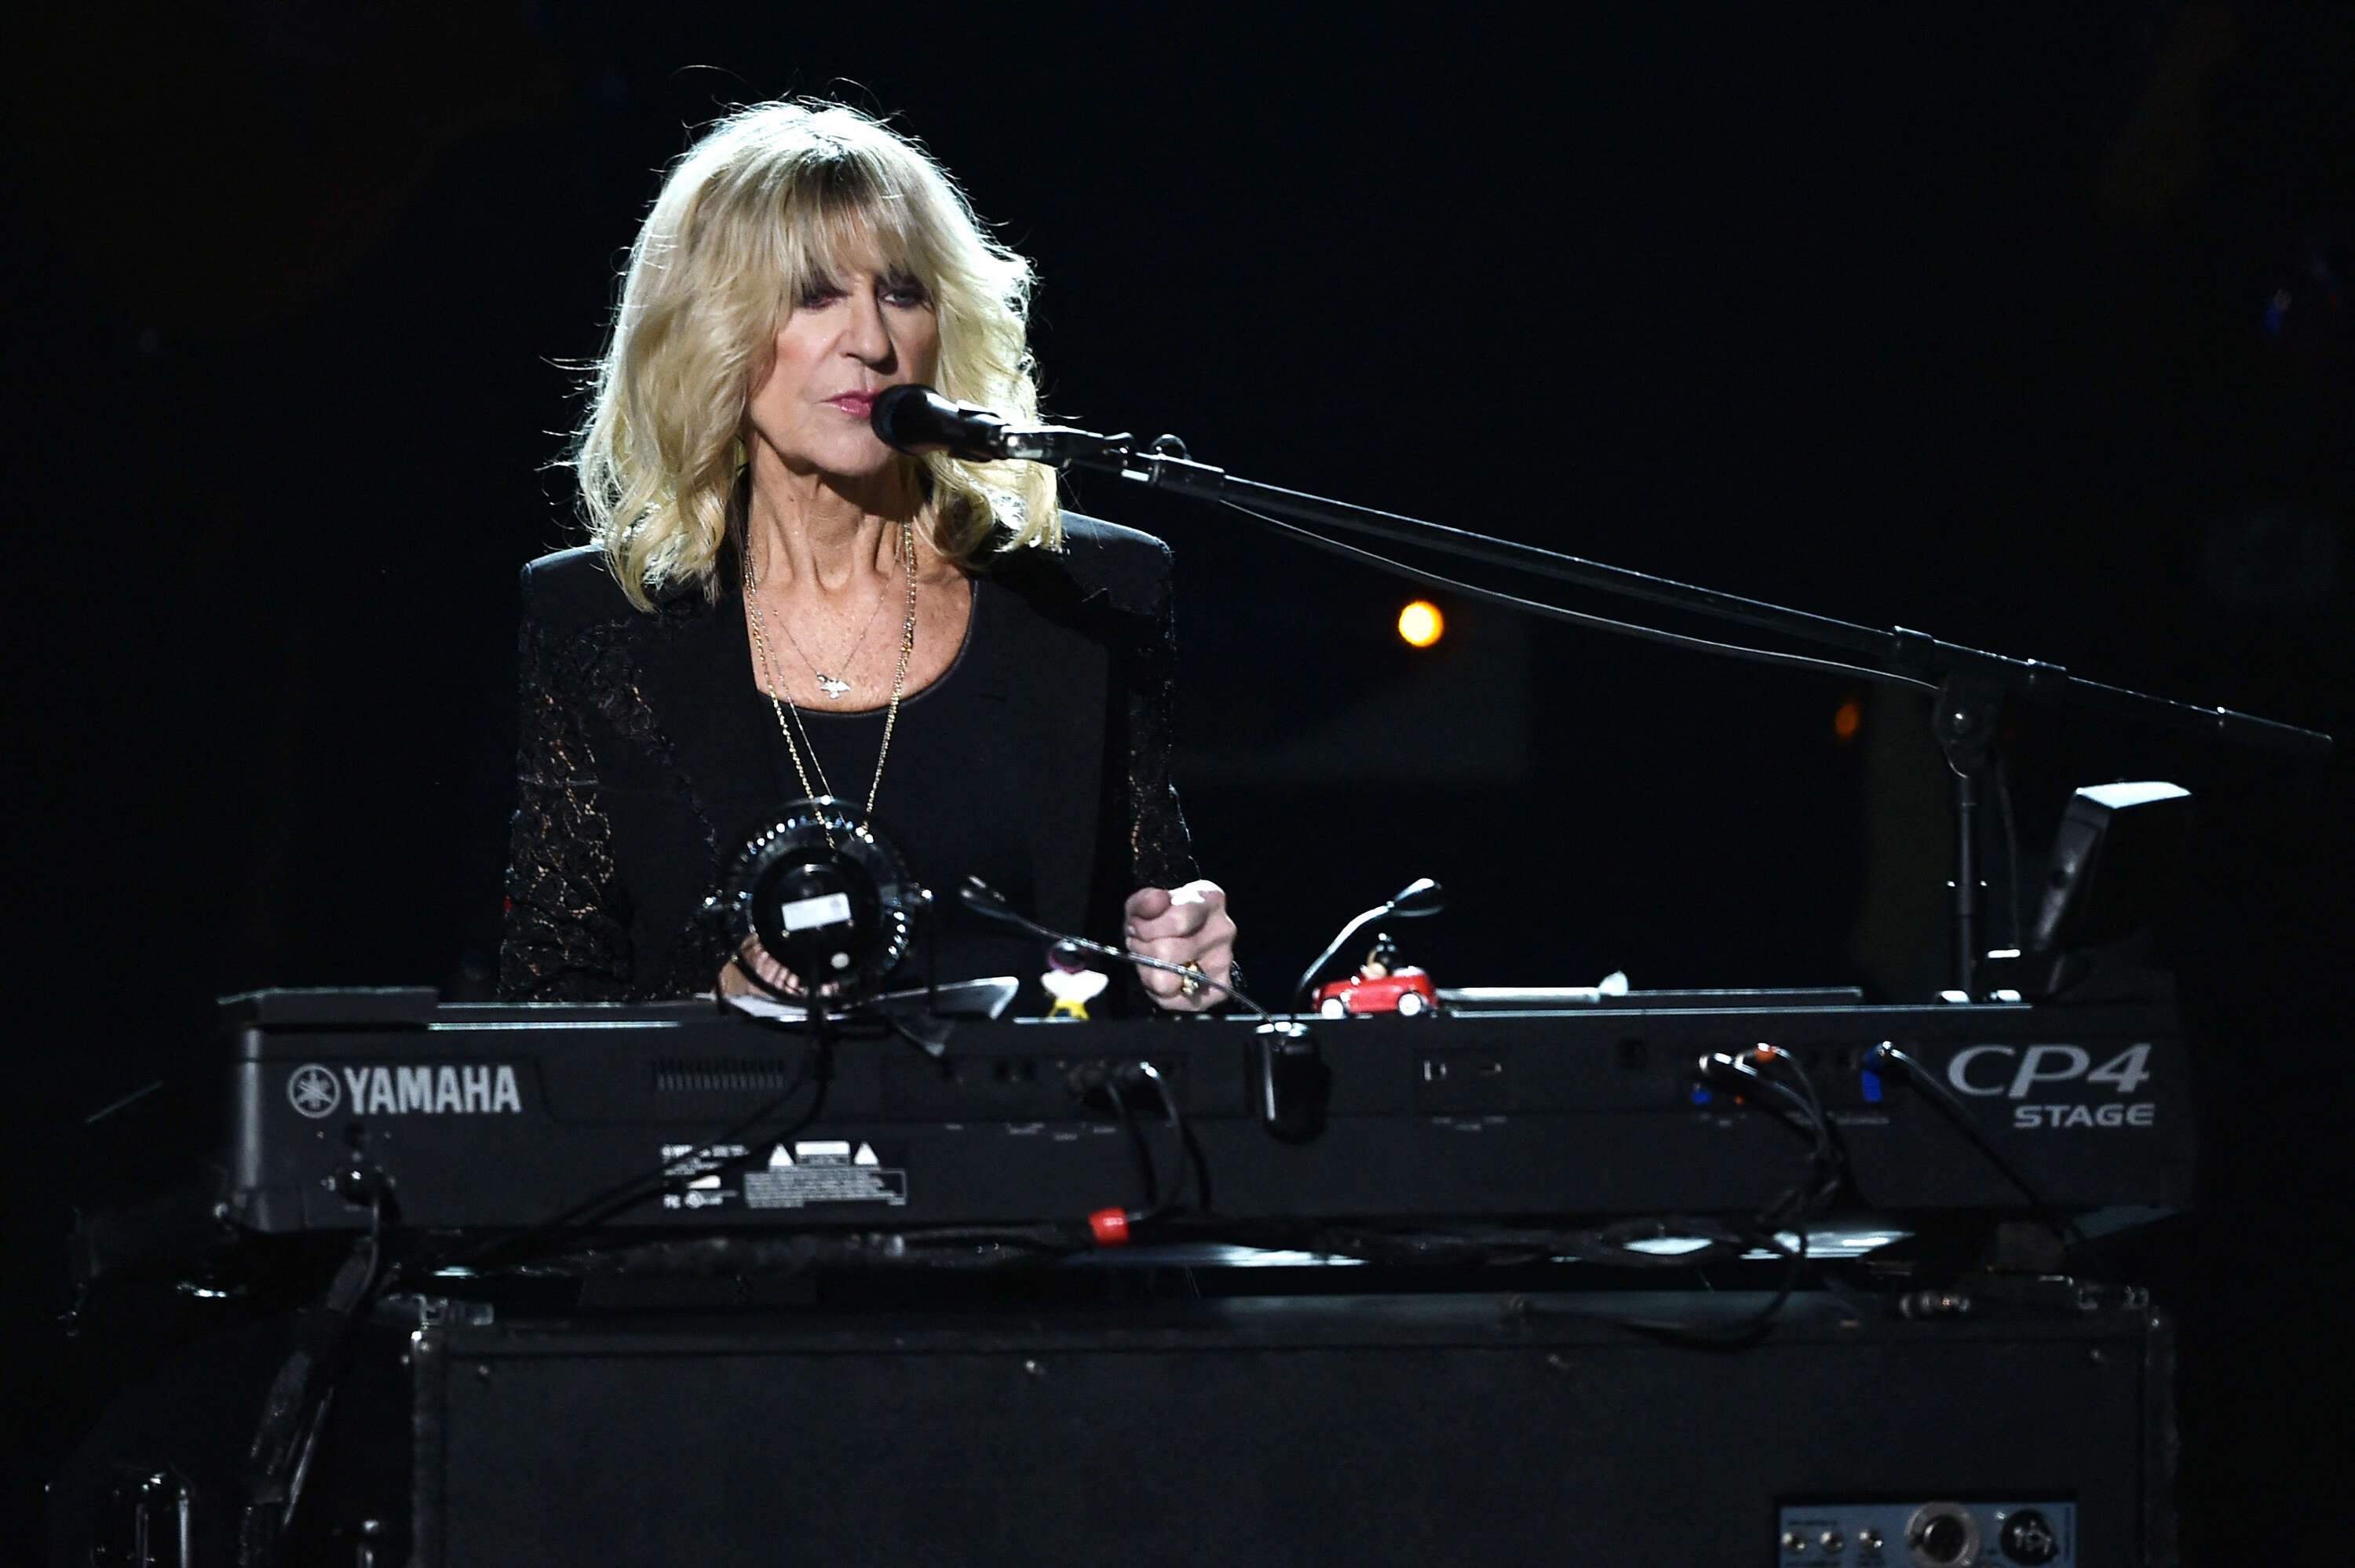 (FILES) In this file photo taken on January 26, 2018 honoree Christine McVie of music group Fleetwood Mac performs onstage during MusiCares Person of the Year honoring Fleetwood Mac at Radio City Music Hall in New York City. - Christine McVie, the English hitmaker and keyboardist who found fame in the 1970s as a member of Fleetwood Mac, died on November 30, 2022, the band and her family said. She was 79 years old. (Photo by Steven Ferdman / GETTY IMAGES NORTH AMERICA / AFP)